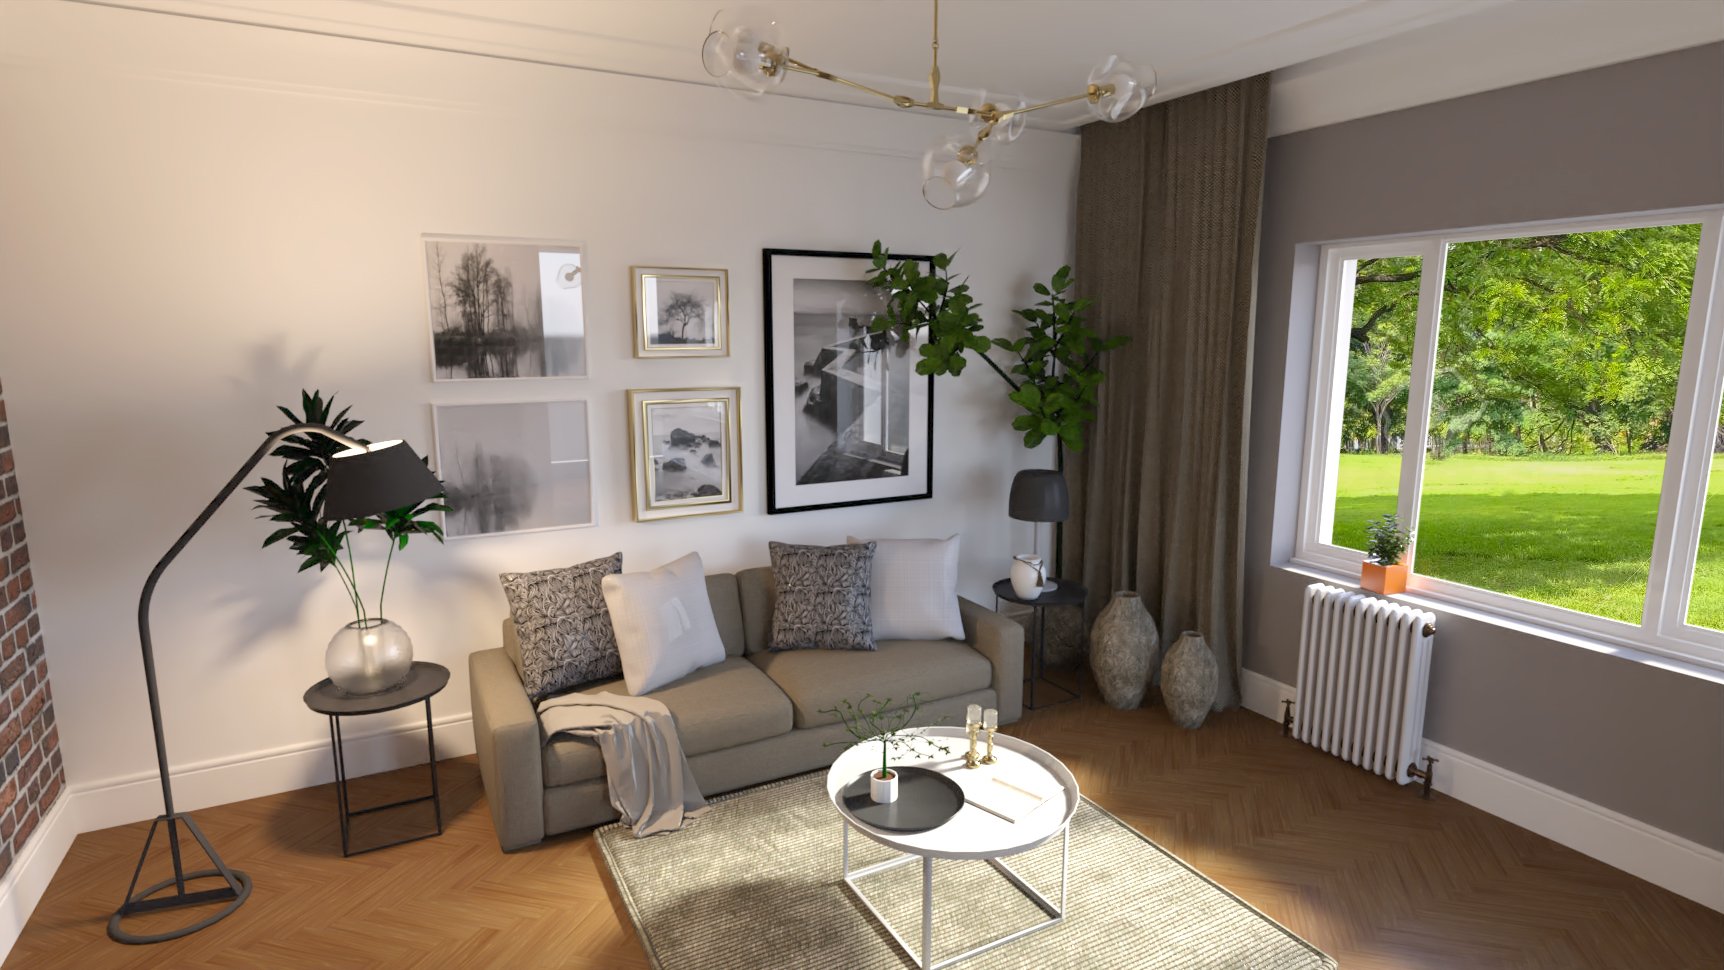 Modern Interior by: PerspectX, 3D Models by Daz 3D